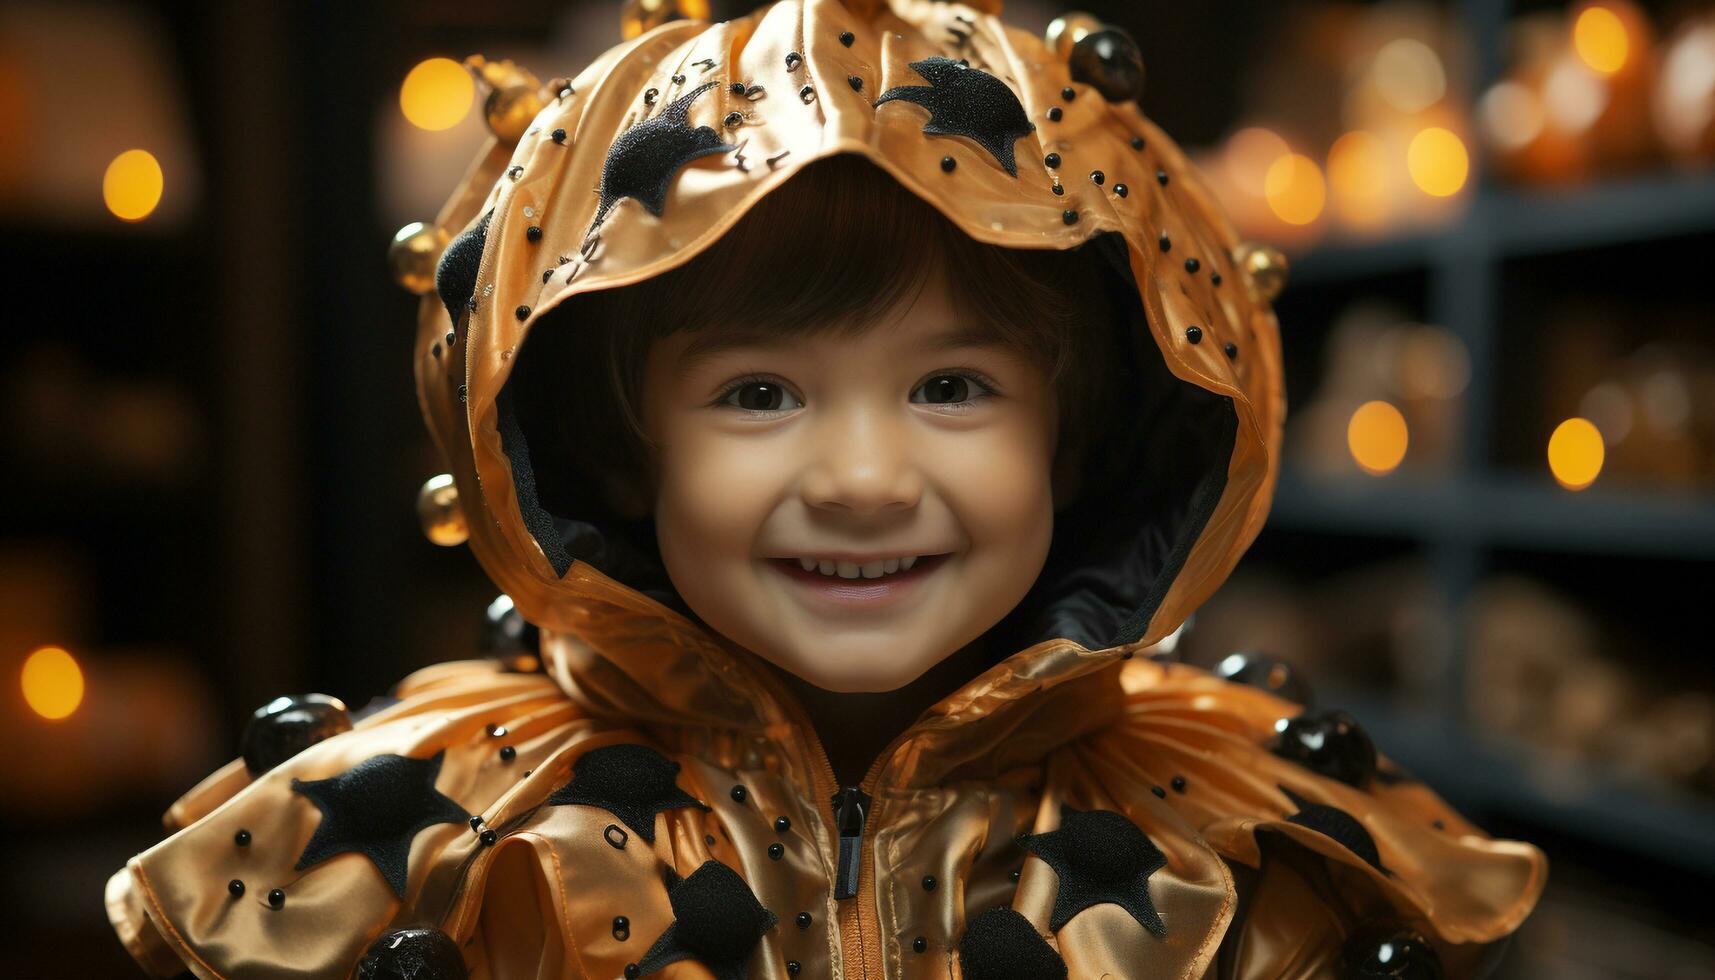 Smiling child, cute happiness, cheerful portrait, childhood fun, joy boys generated by AI photo